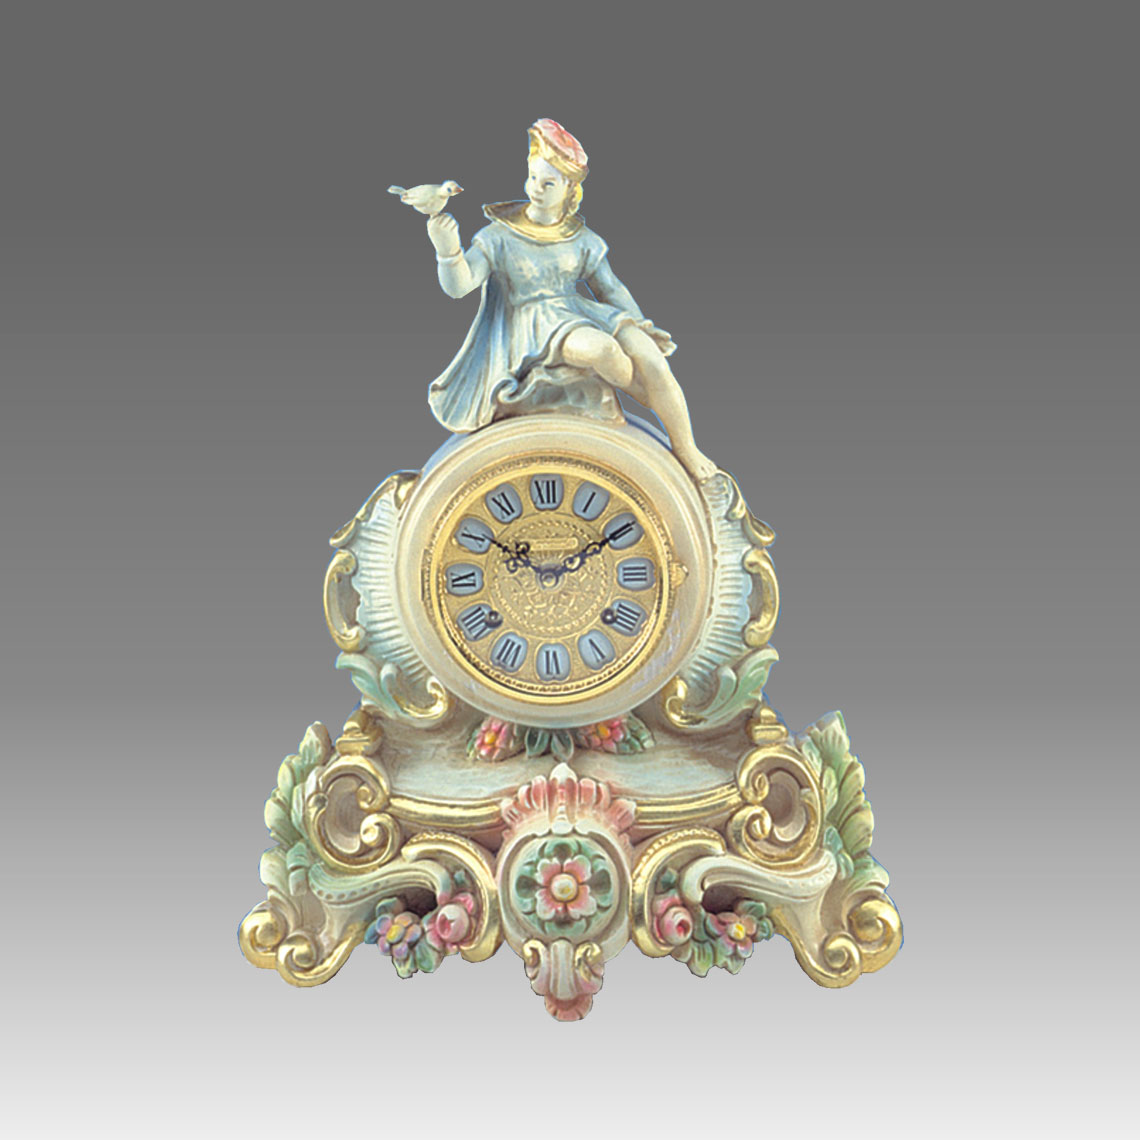 Mante Clock, Table Clock, Cimn Clock, Art.332/3 lacquered white patinated with gold leaf and decoration- Bim Bam melody on Bells, gilt gold round dial